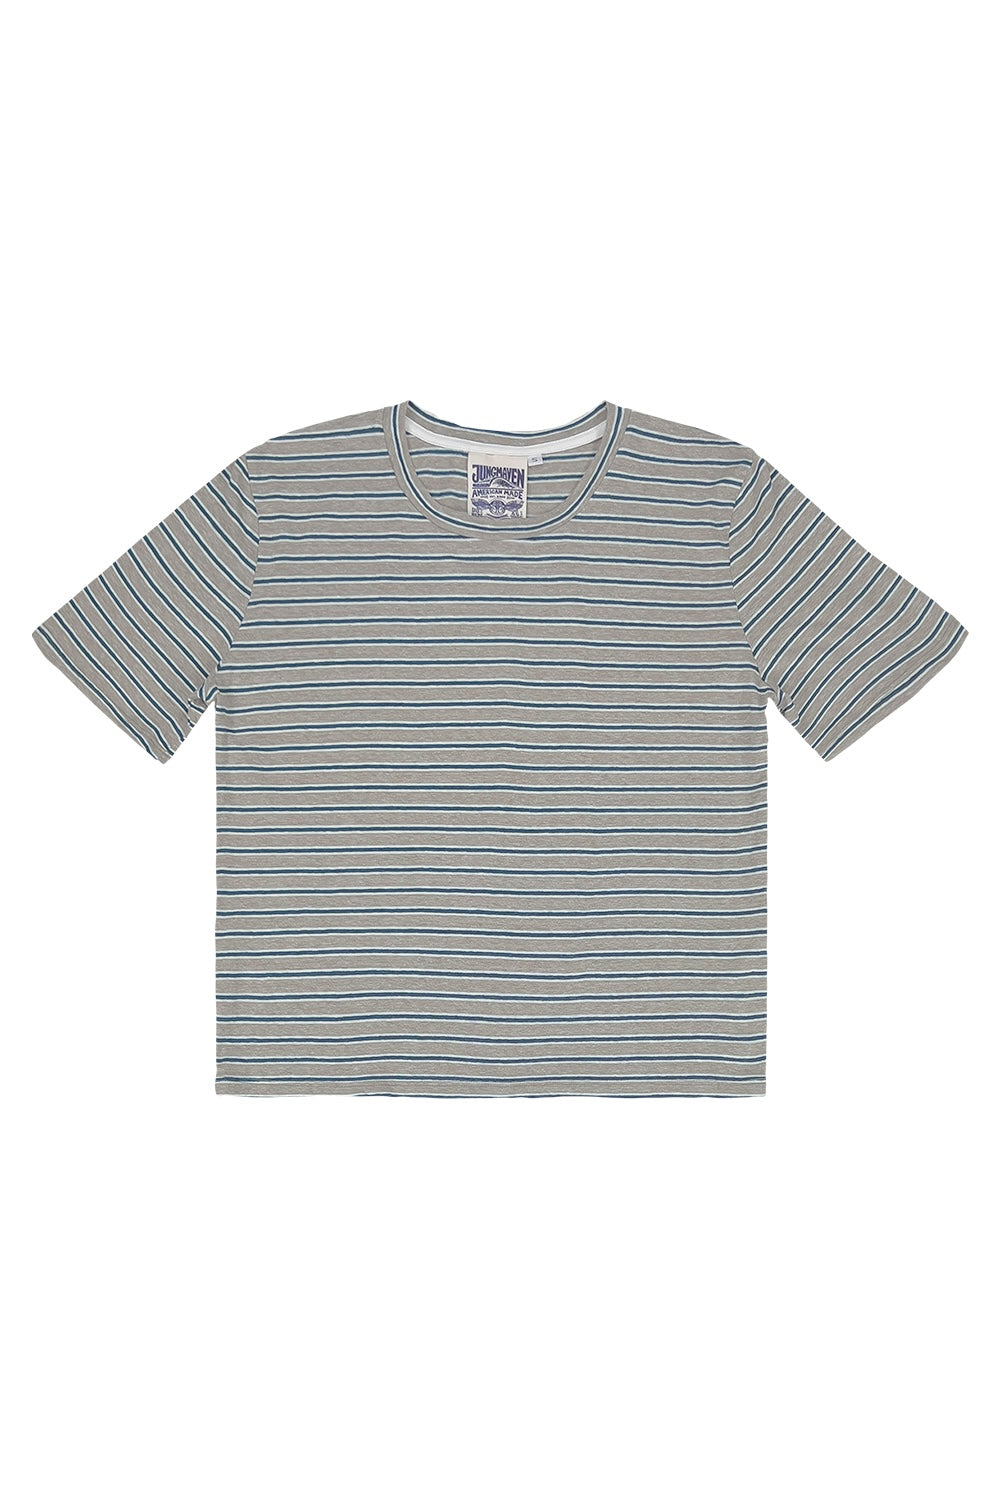 Stripe Silverlake Cropped Tee | Jungmaven Hemp Clothing & Accessories / Color: Teal/White/Gray Stripe